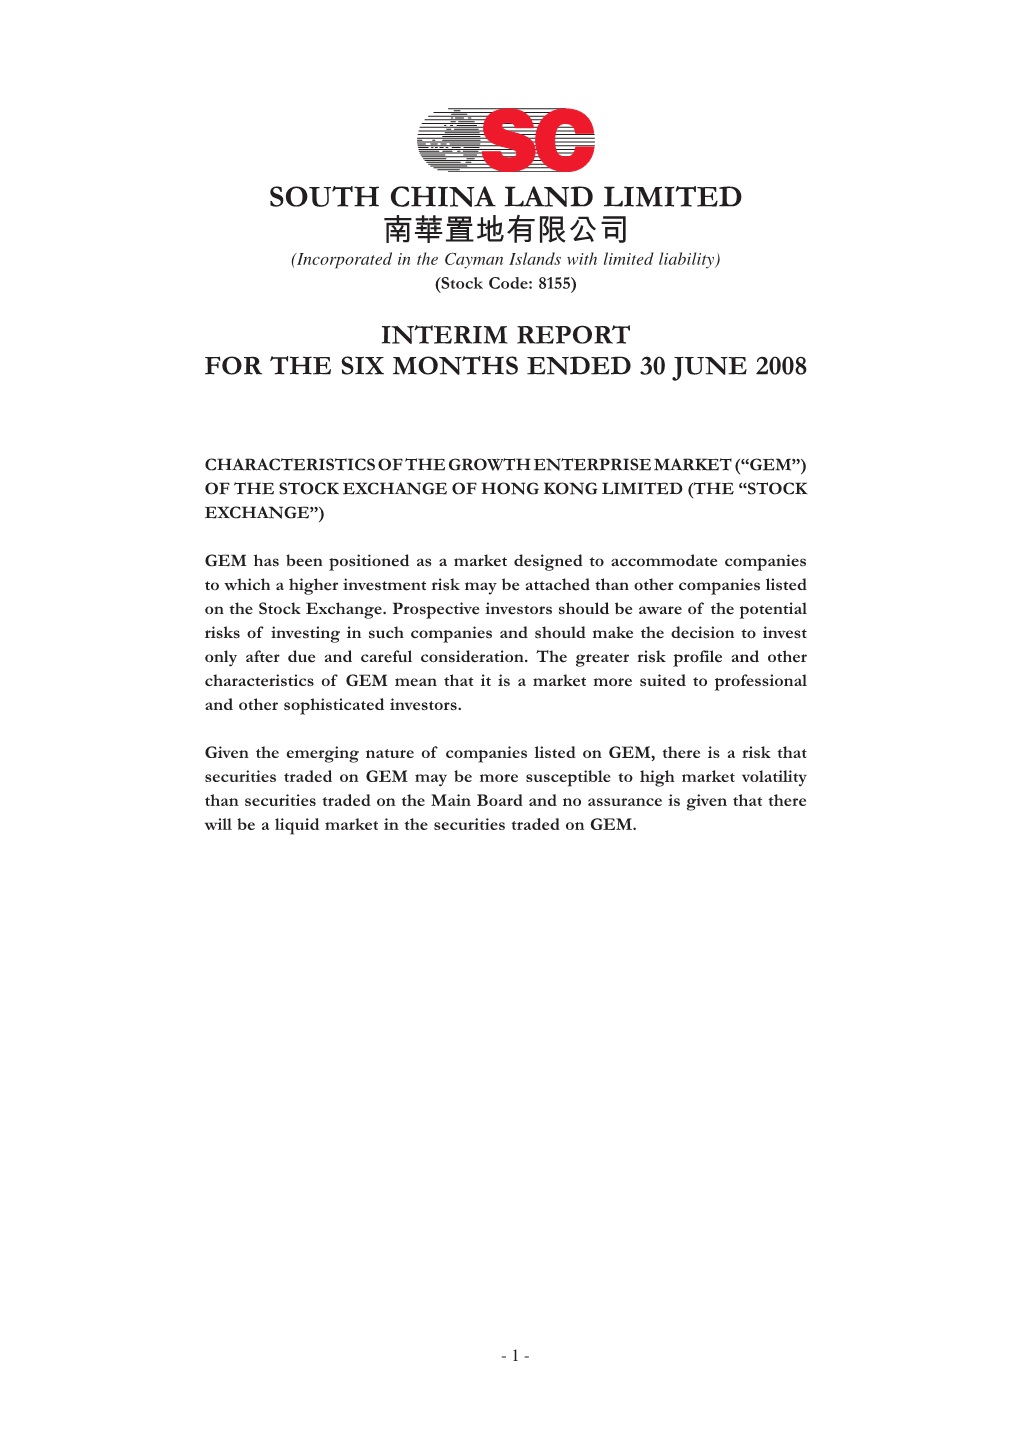 Interim Report for the Six Months Ended 30 June 2008